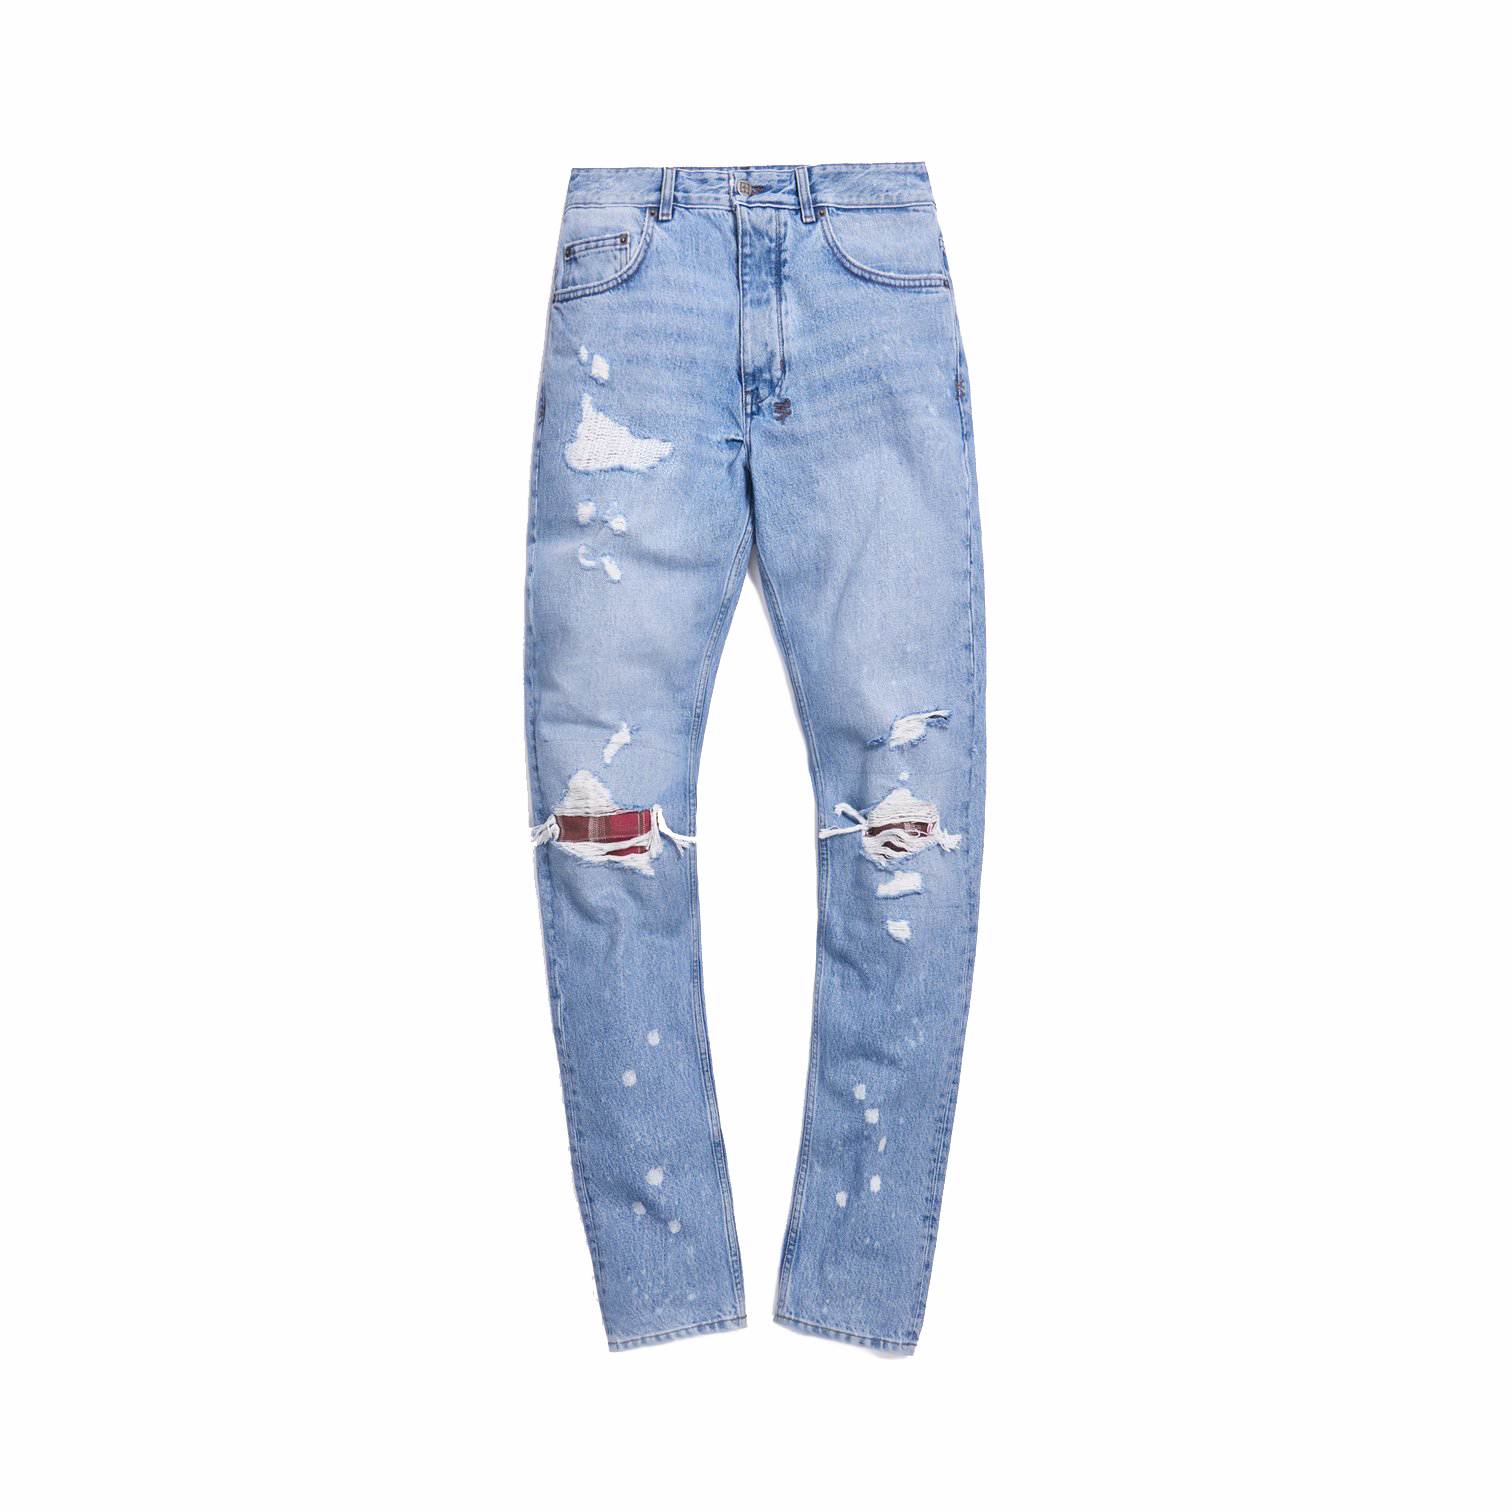 Kith x Ksubi Chitch Pants Washed Out - SS20 Men's - US